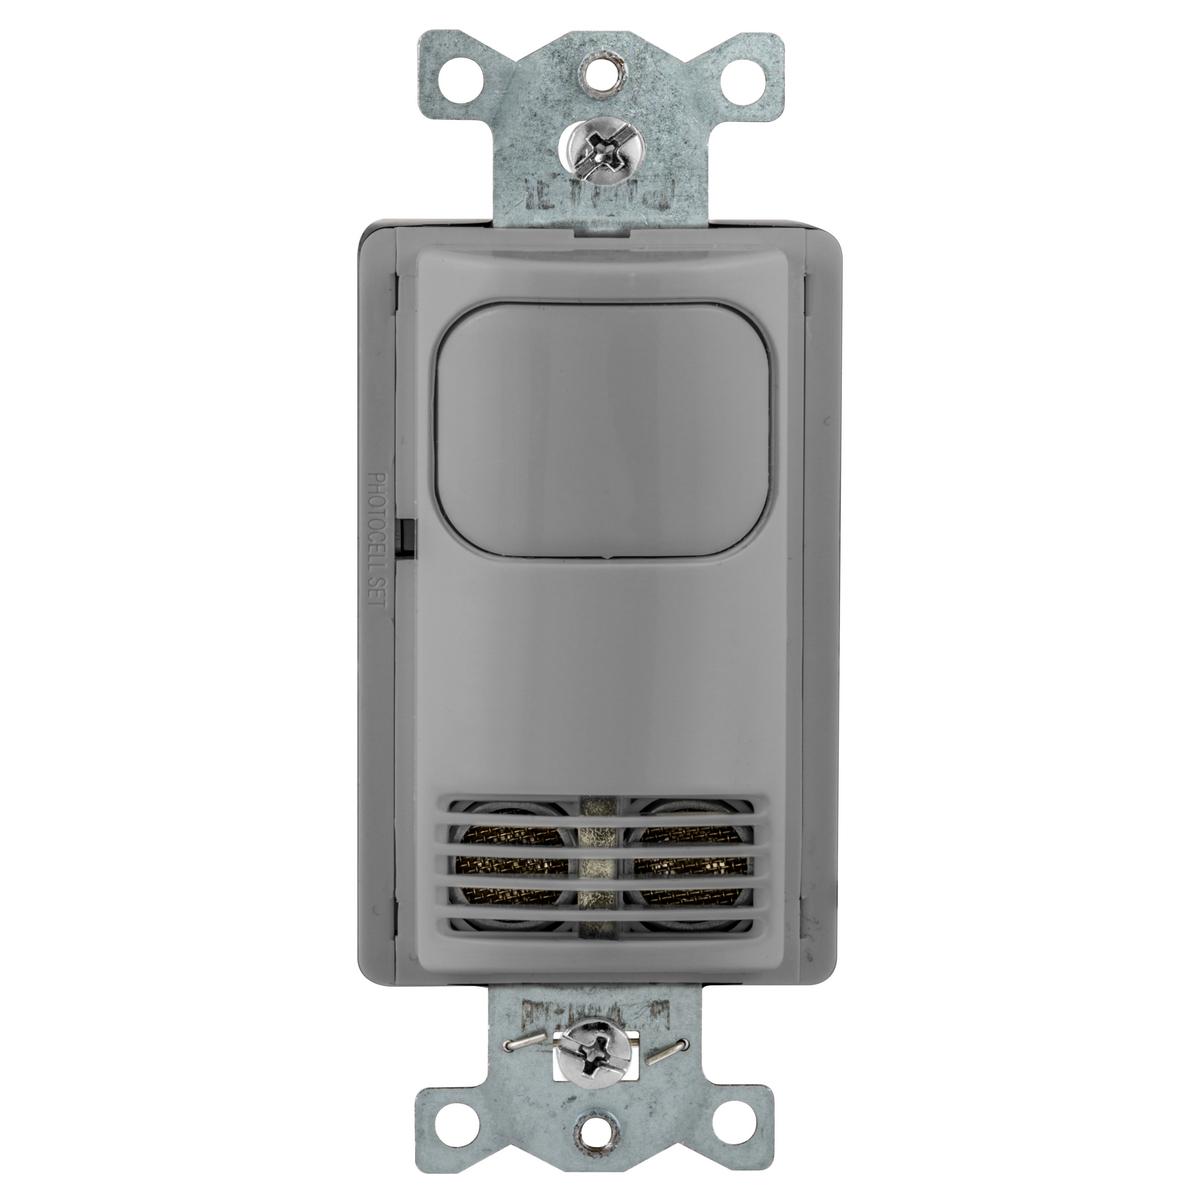 Hubbell MSD2000GY1N Occupancy Sensing Products, Wall Switch, Occupancy or Vacancy, Dual Tech, 1 Relay, 1000 Square Feet, 800W Incandescent, 1000W Fluorescent @ 120V AC, 1800W Fluorescent @ 277V 